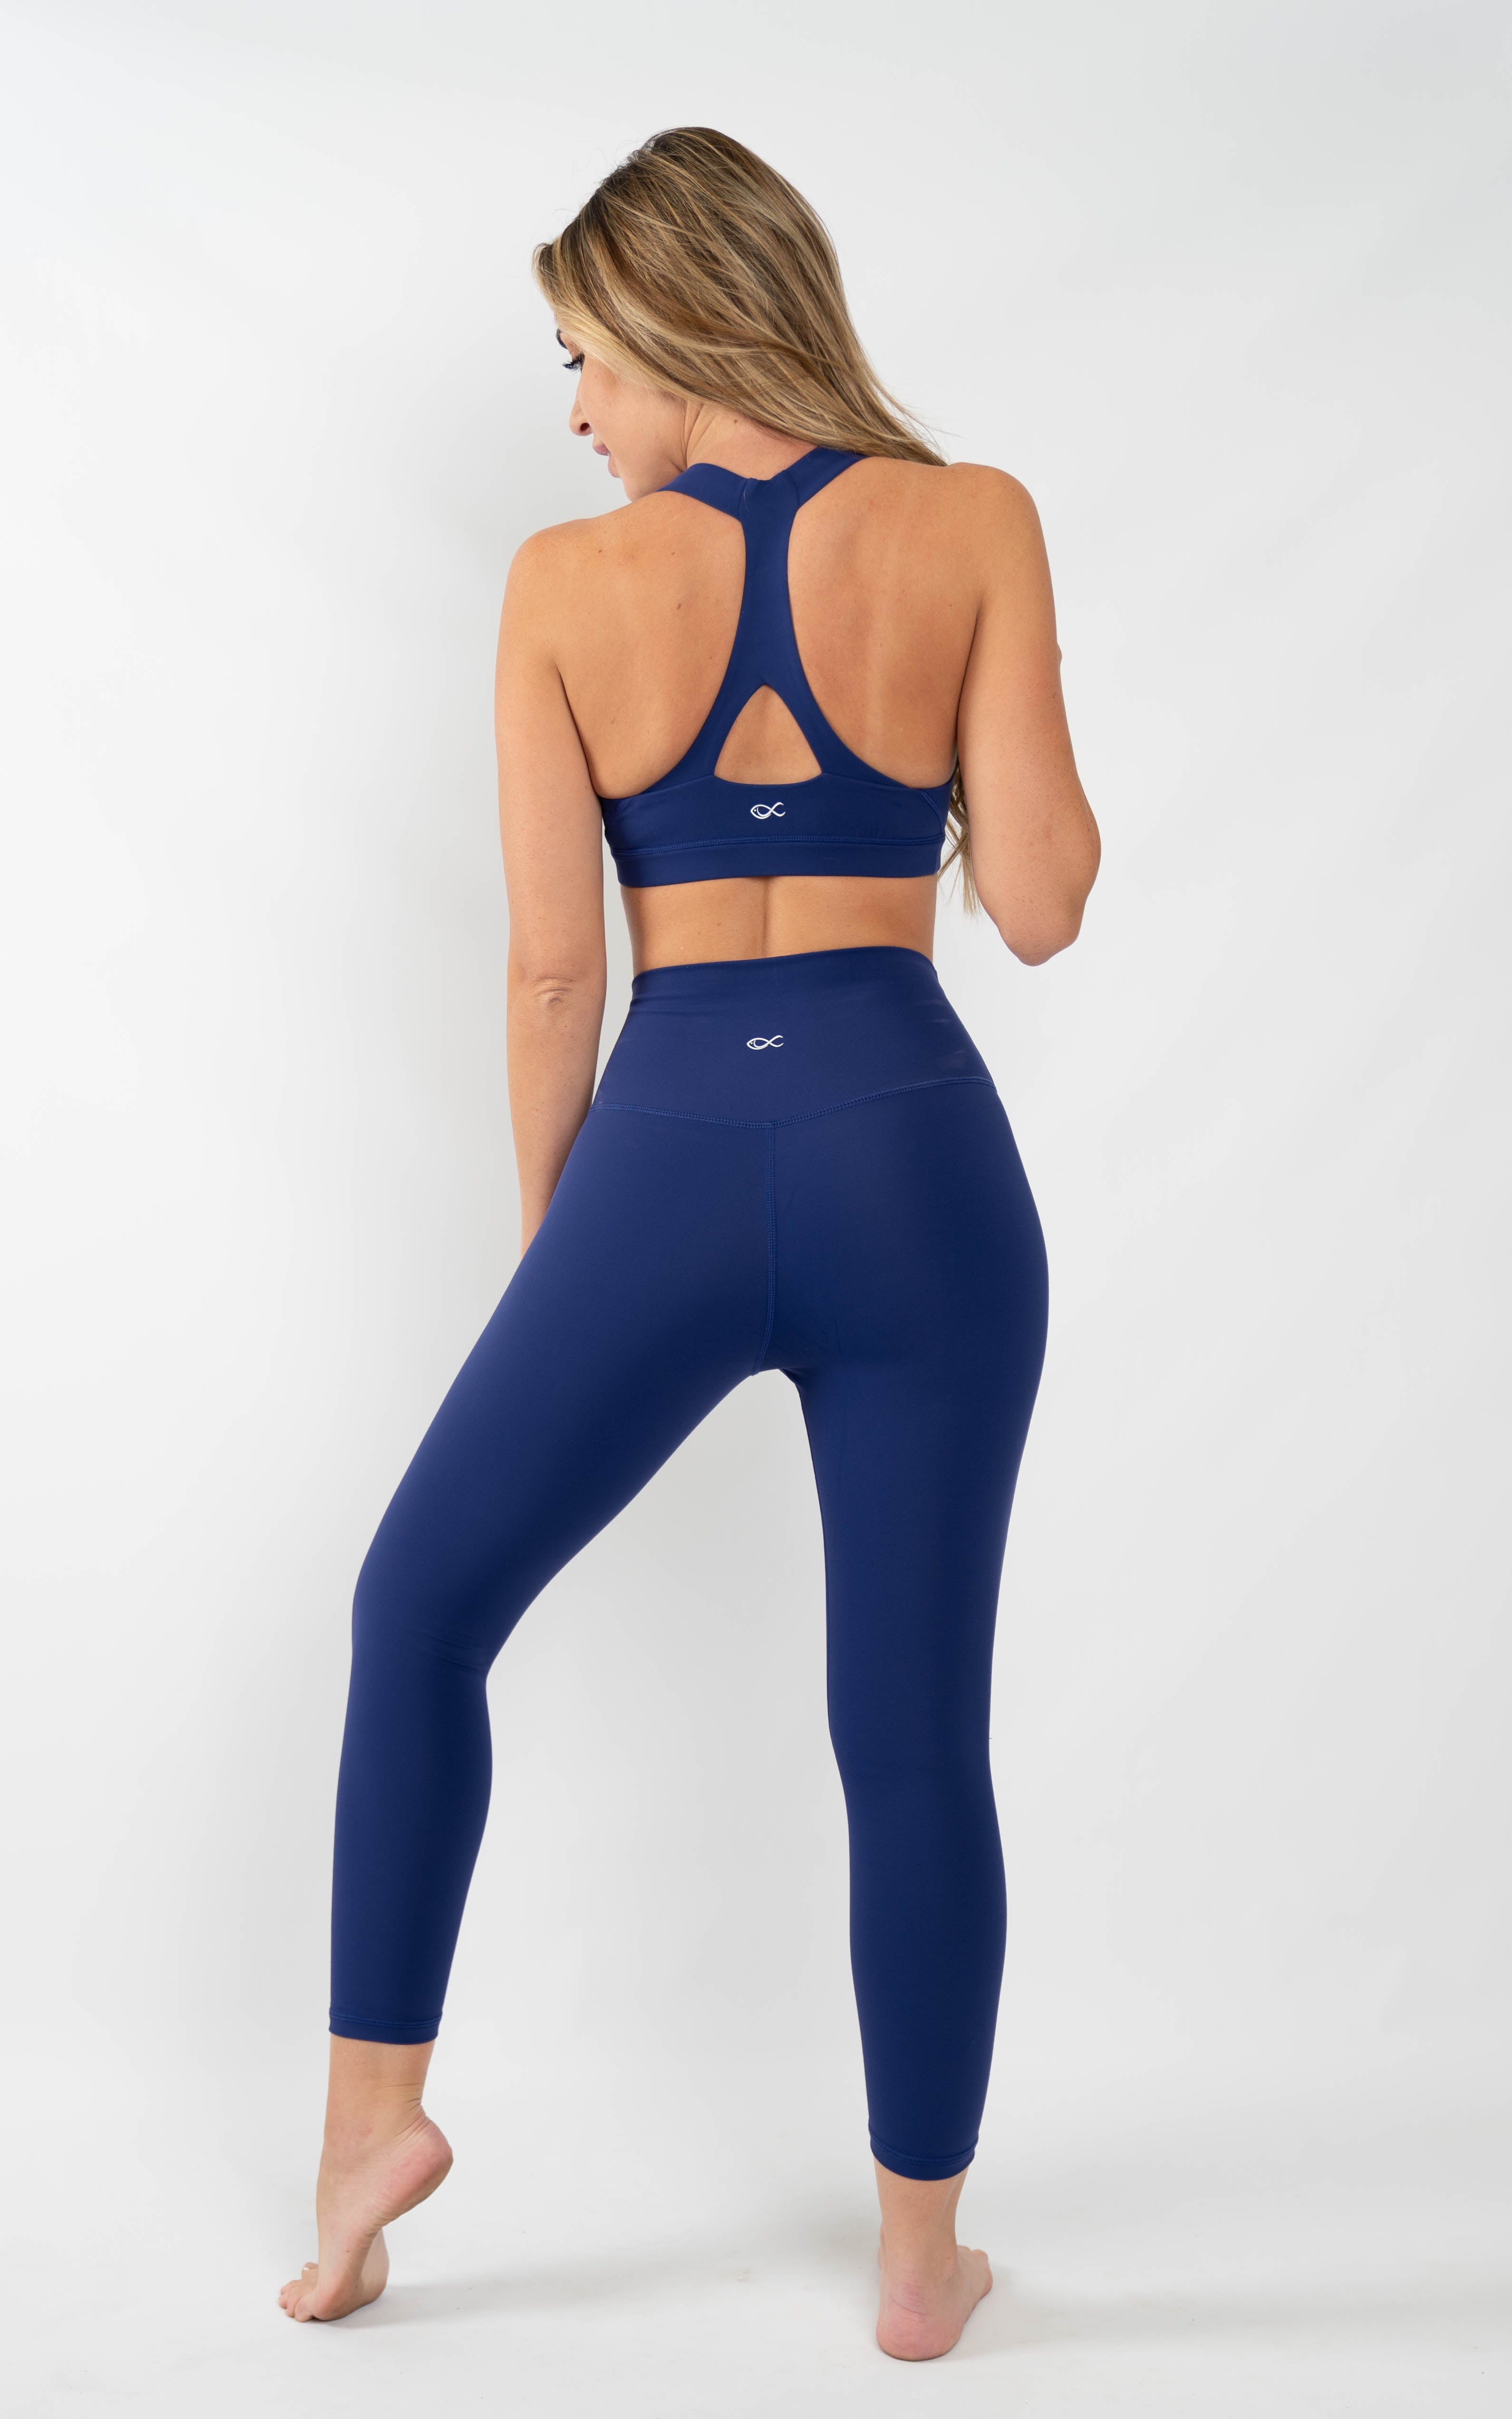 Bliss Leggings in Blueprint - Southern Athletica